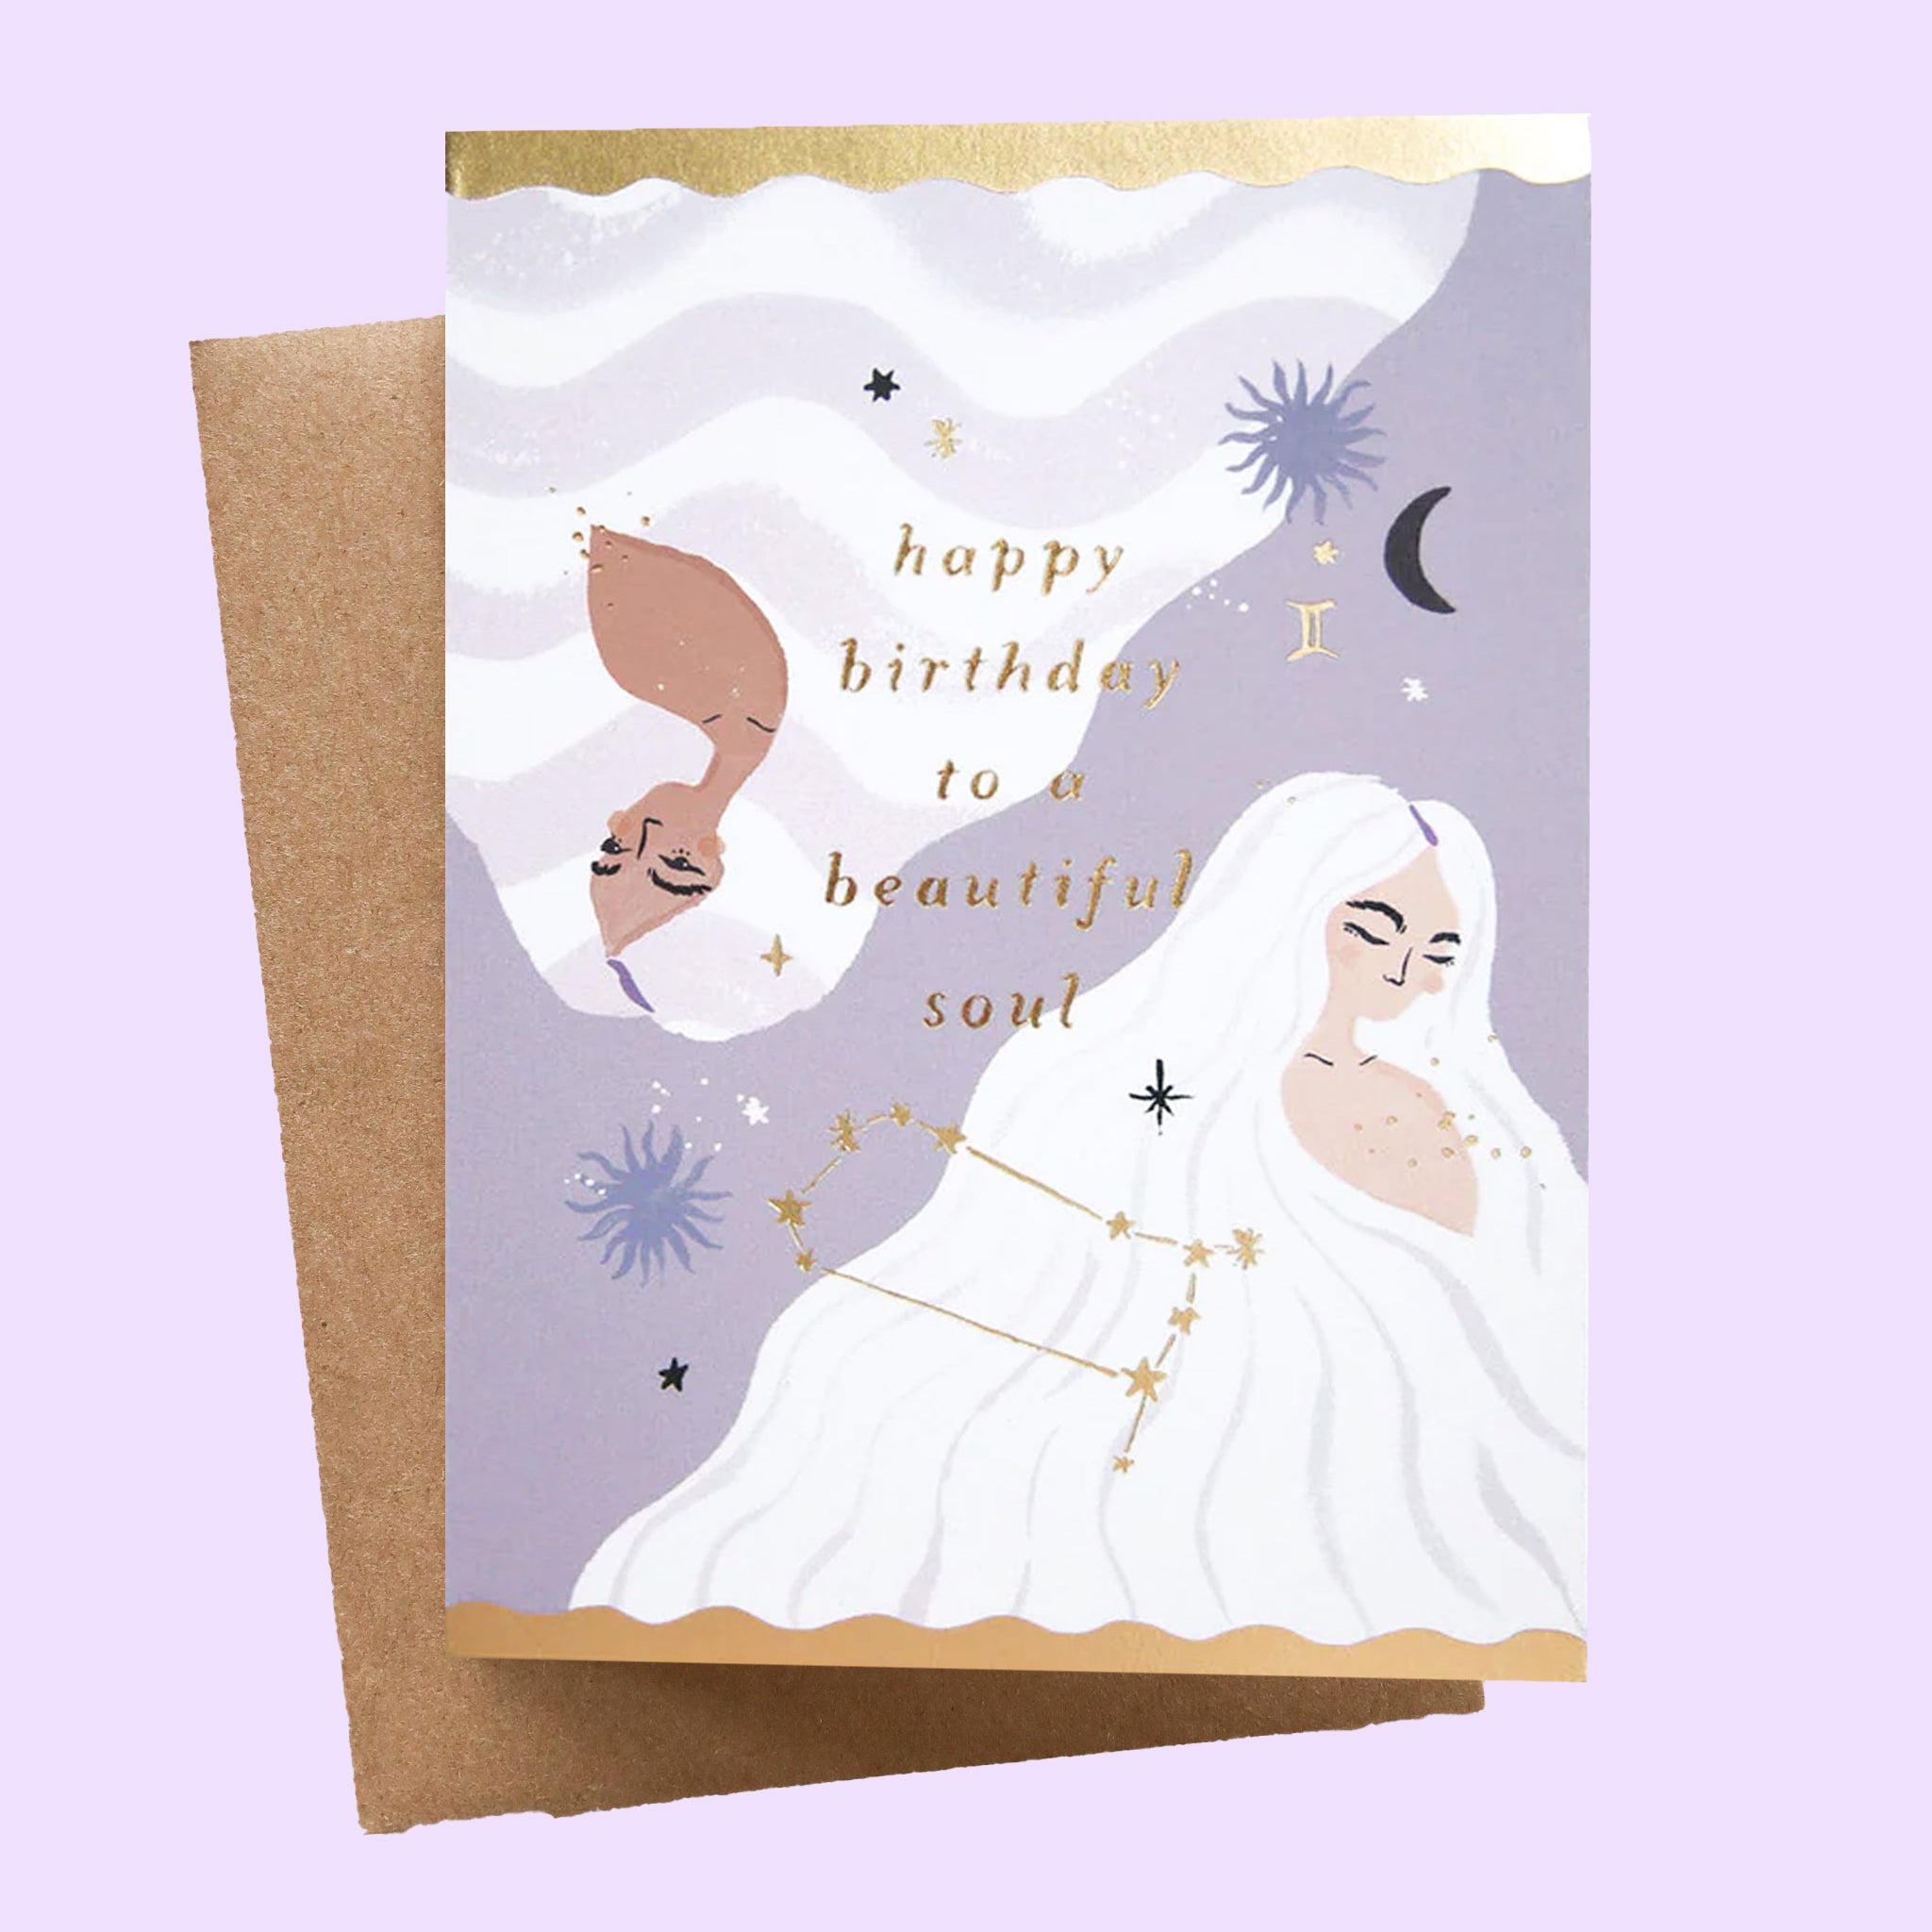 On a neutral background is a card with a woman on the front and gold text that reads, &quot;happy birthday to a beautiful soul&quot; along with star and moon illustrations.